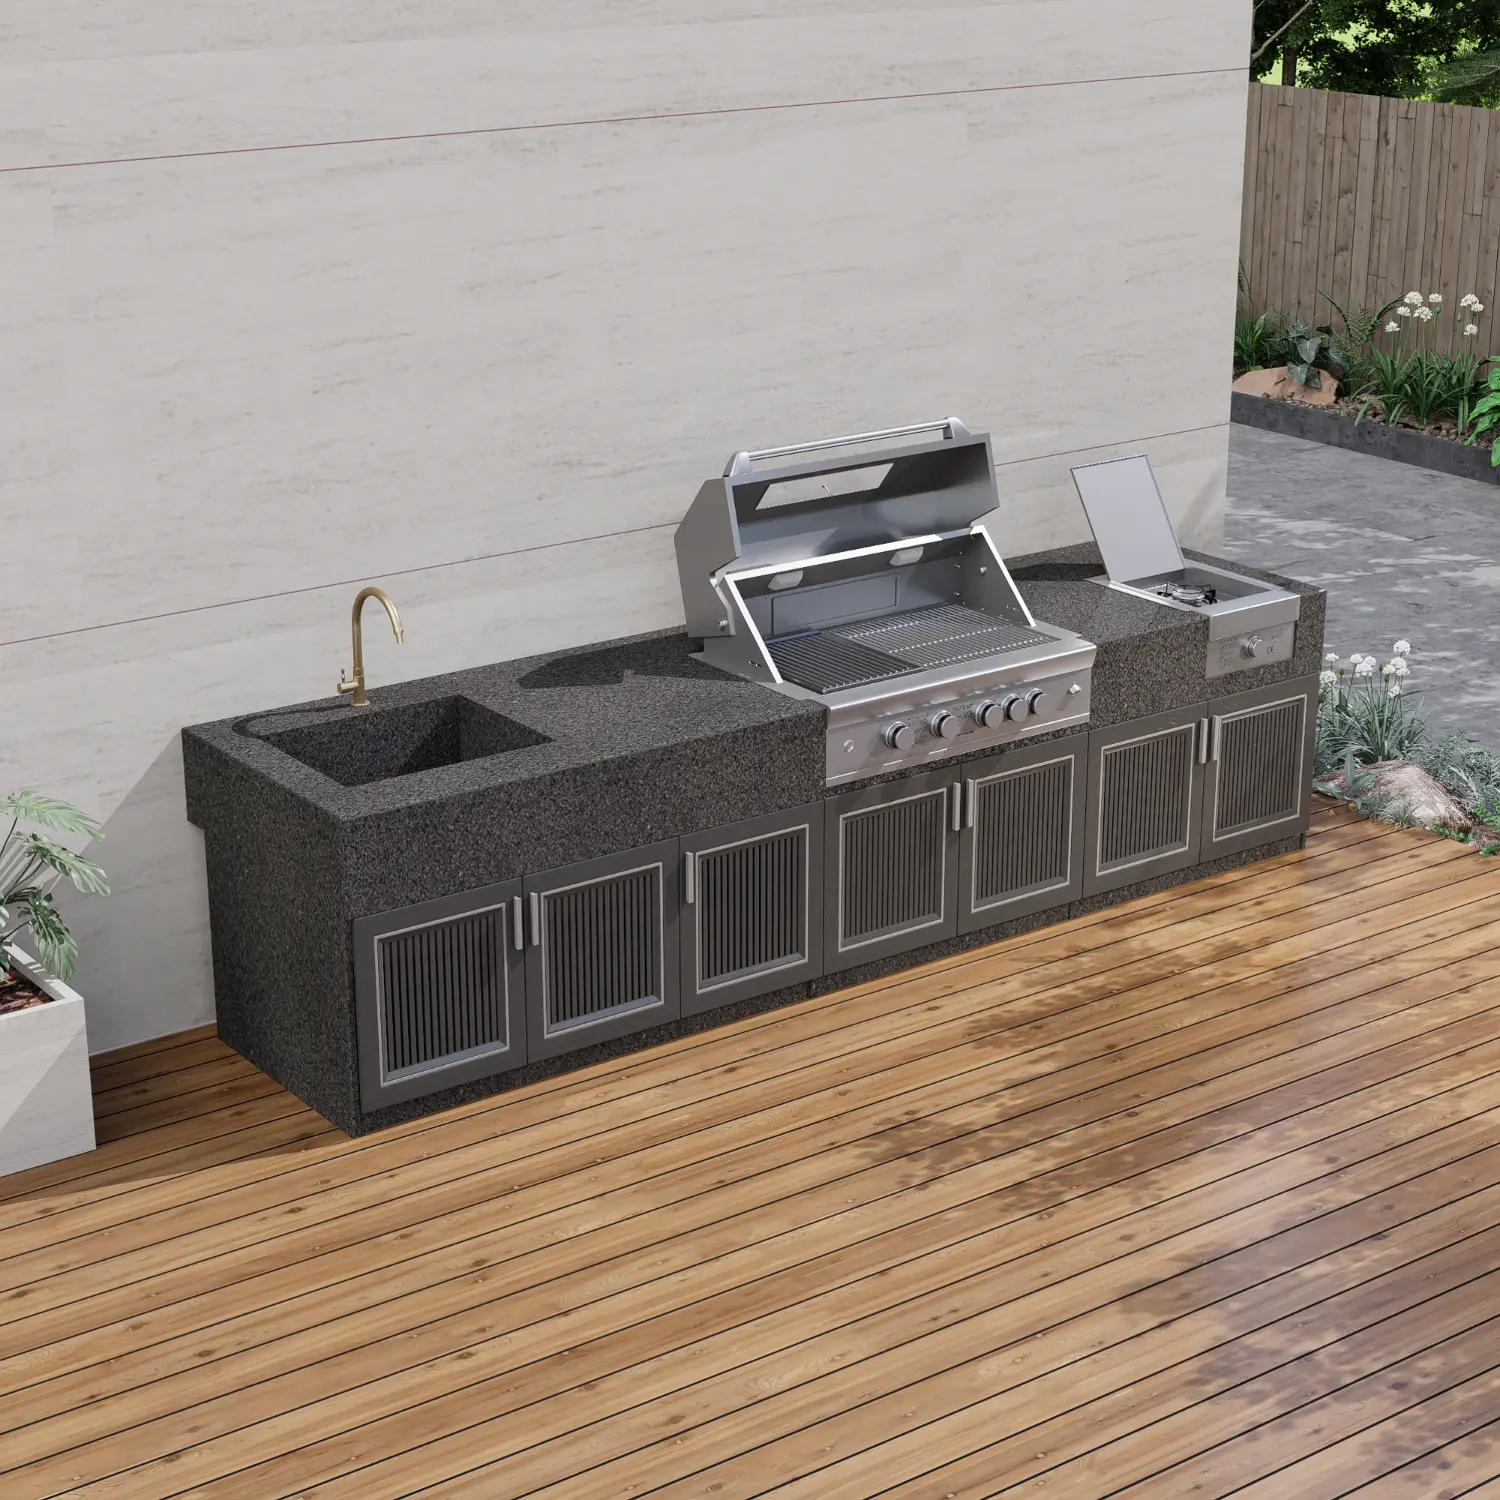 Premium Outdoor BBQ Grill Marble Countertop With Cabinet Simple Elegant Outdoor Kitchen For Garden Yard